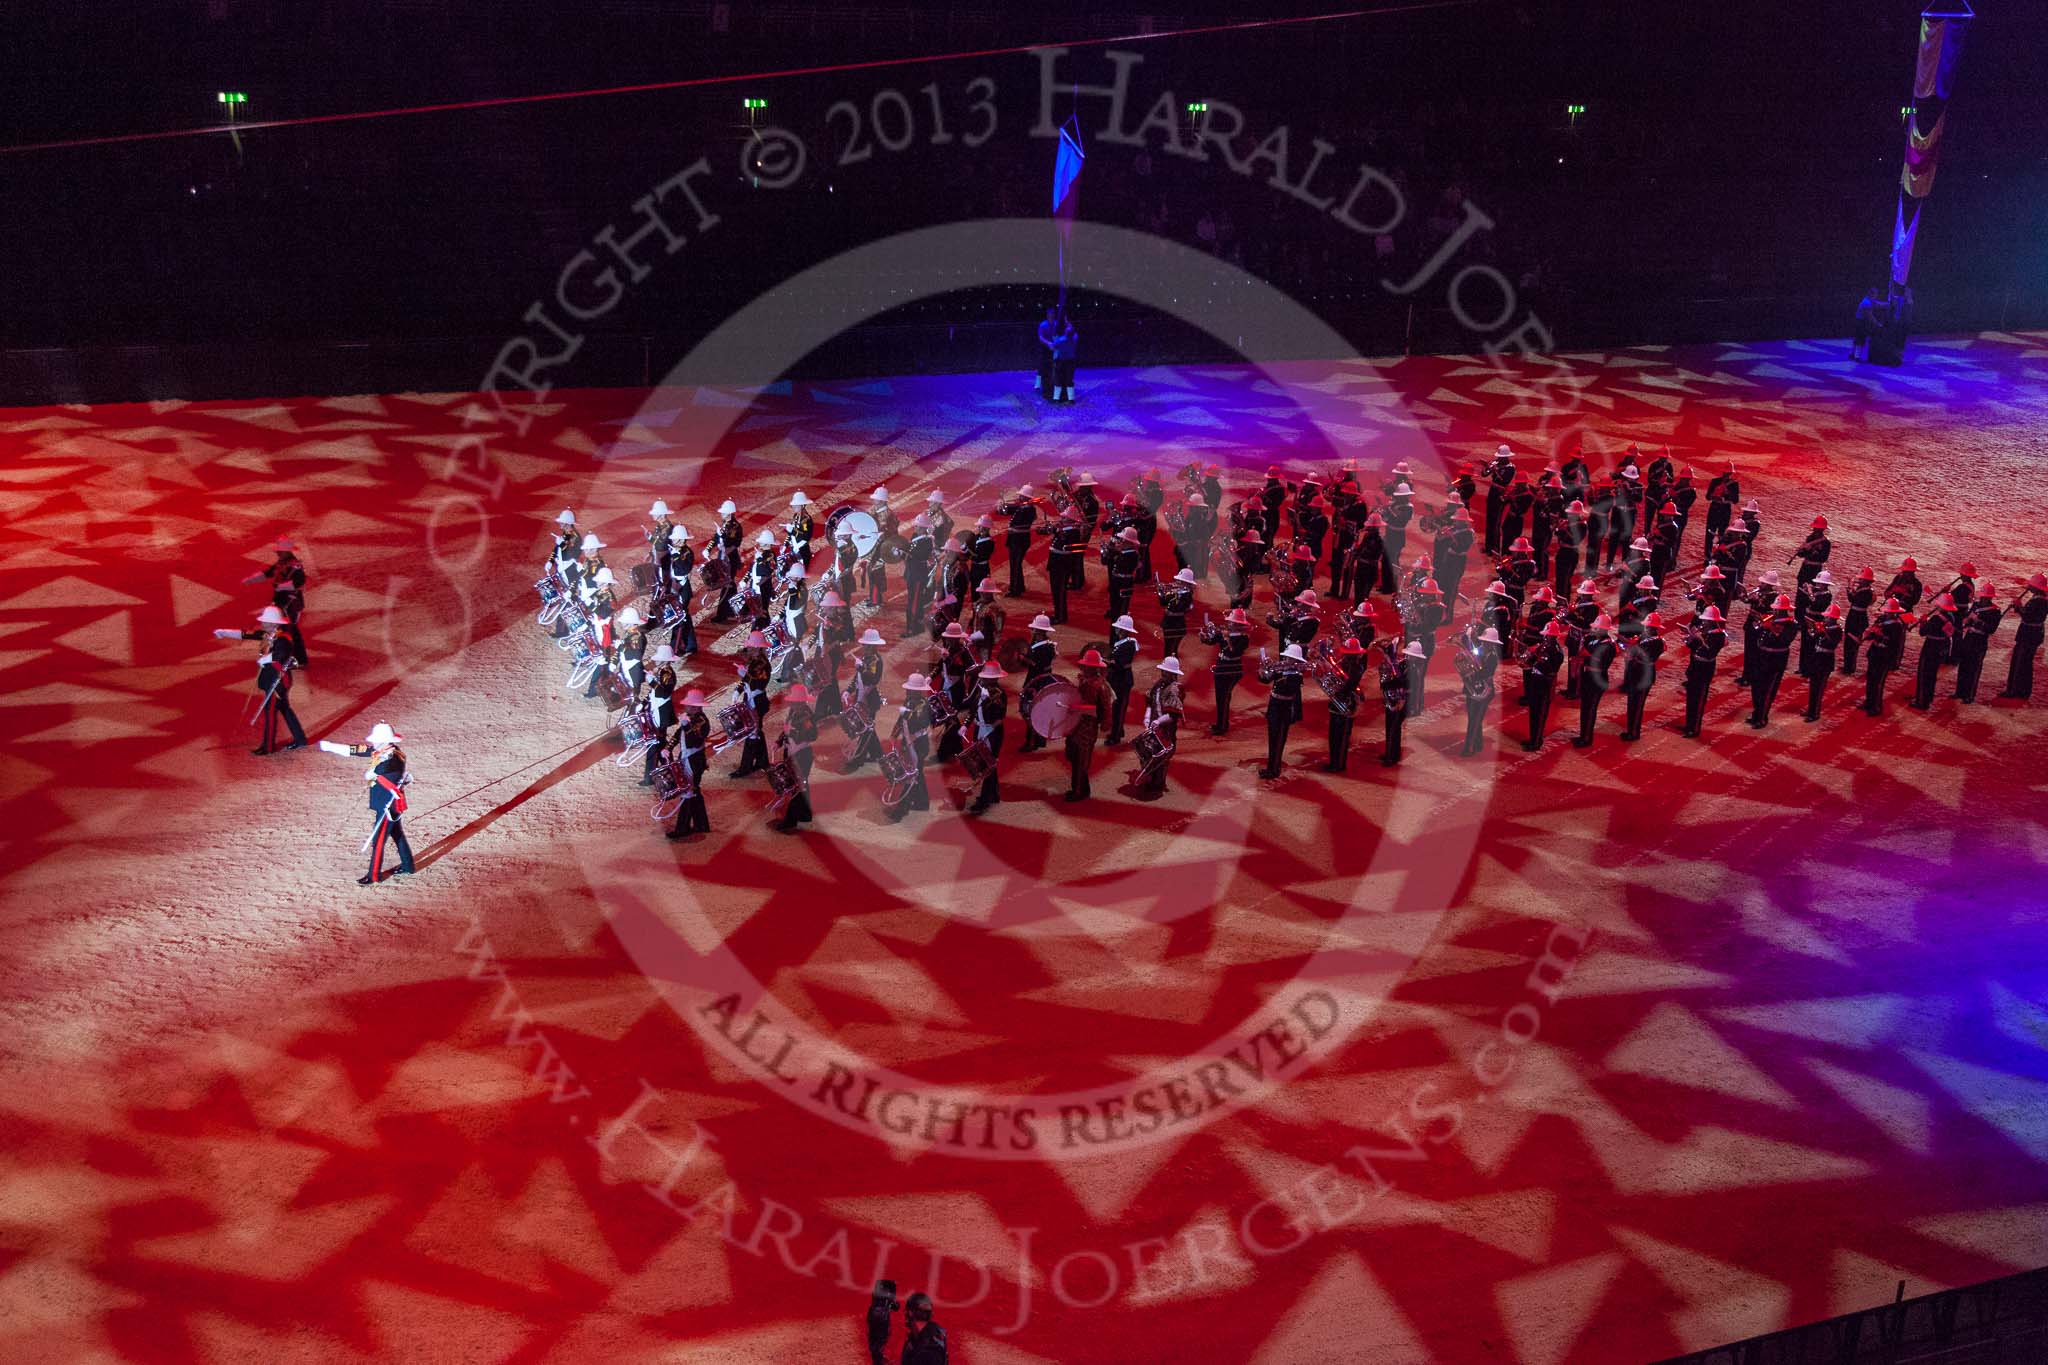 British Military Tournament 2013: The Royal Marines Massed Band..
Earls Court,
London SW5,

United Kingdom,
on 06 December 2013 at 14:57, image #68